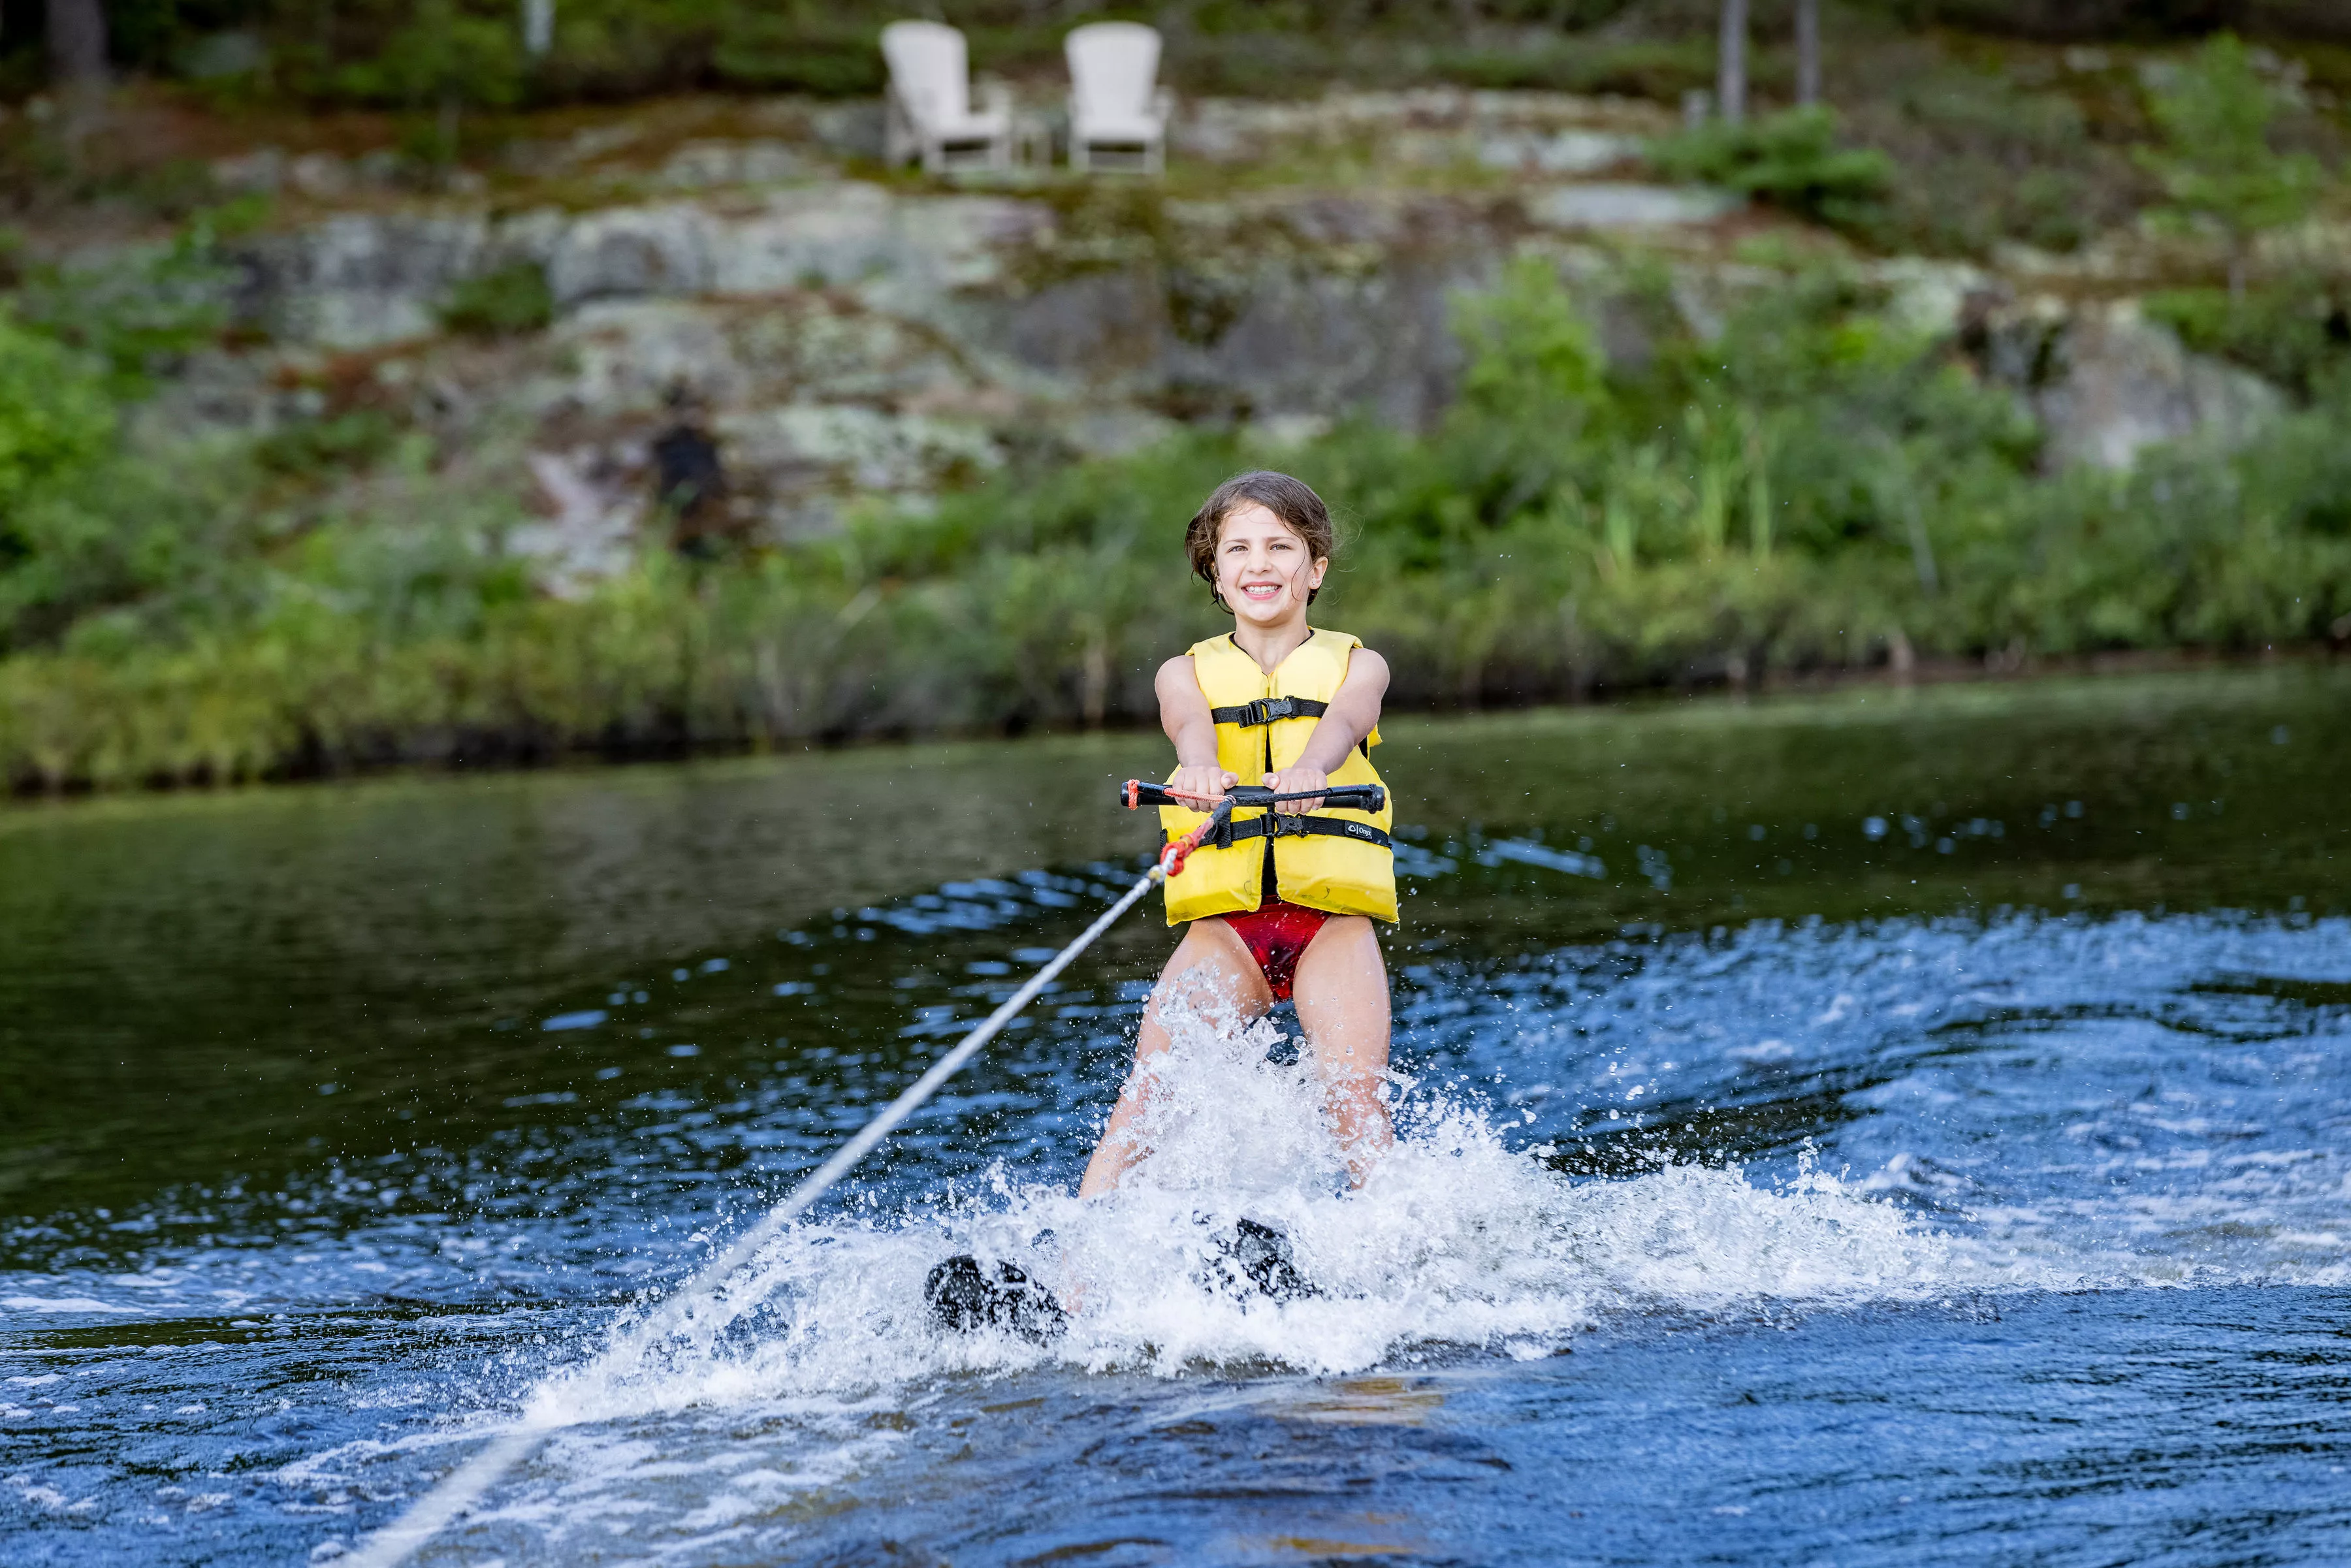 World Barefoot Center in USA, North America | Water Skiing - Rated 1.6